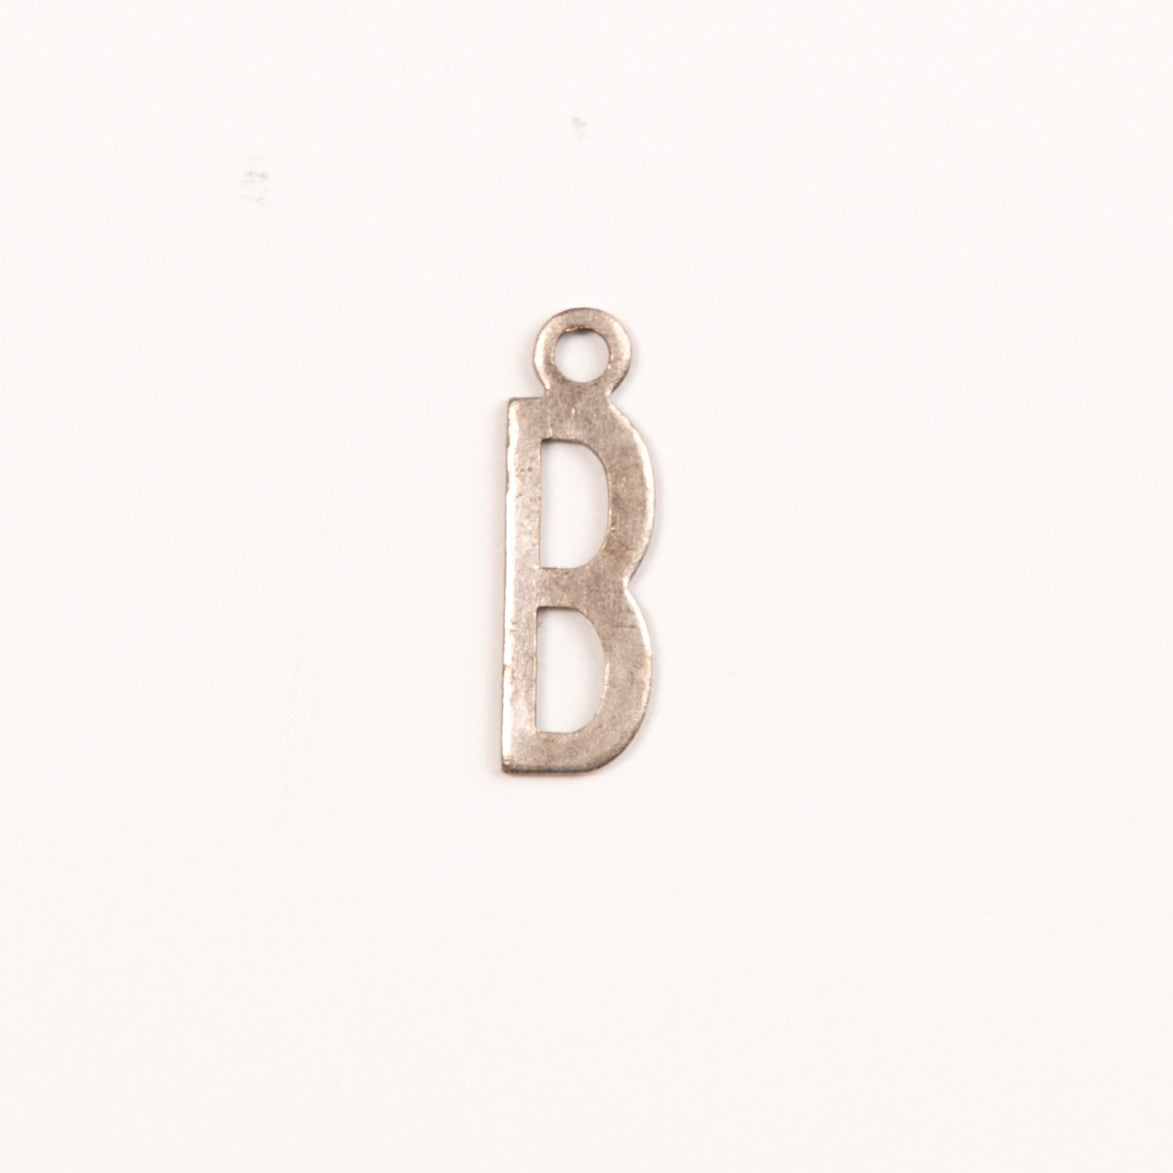 15x6mm "B" Letter Charm, Antique Gold, Classic Silver, Antique Silver Metal Stamping, pk/6